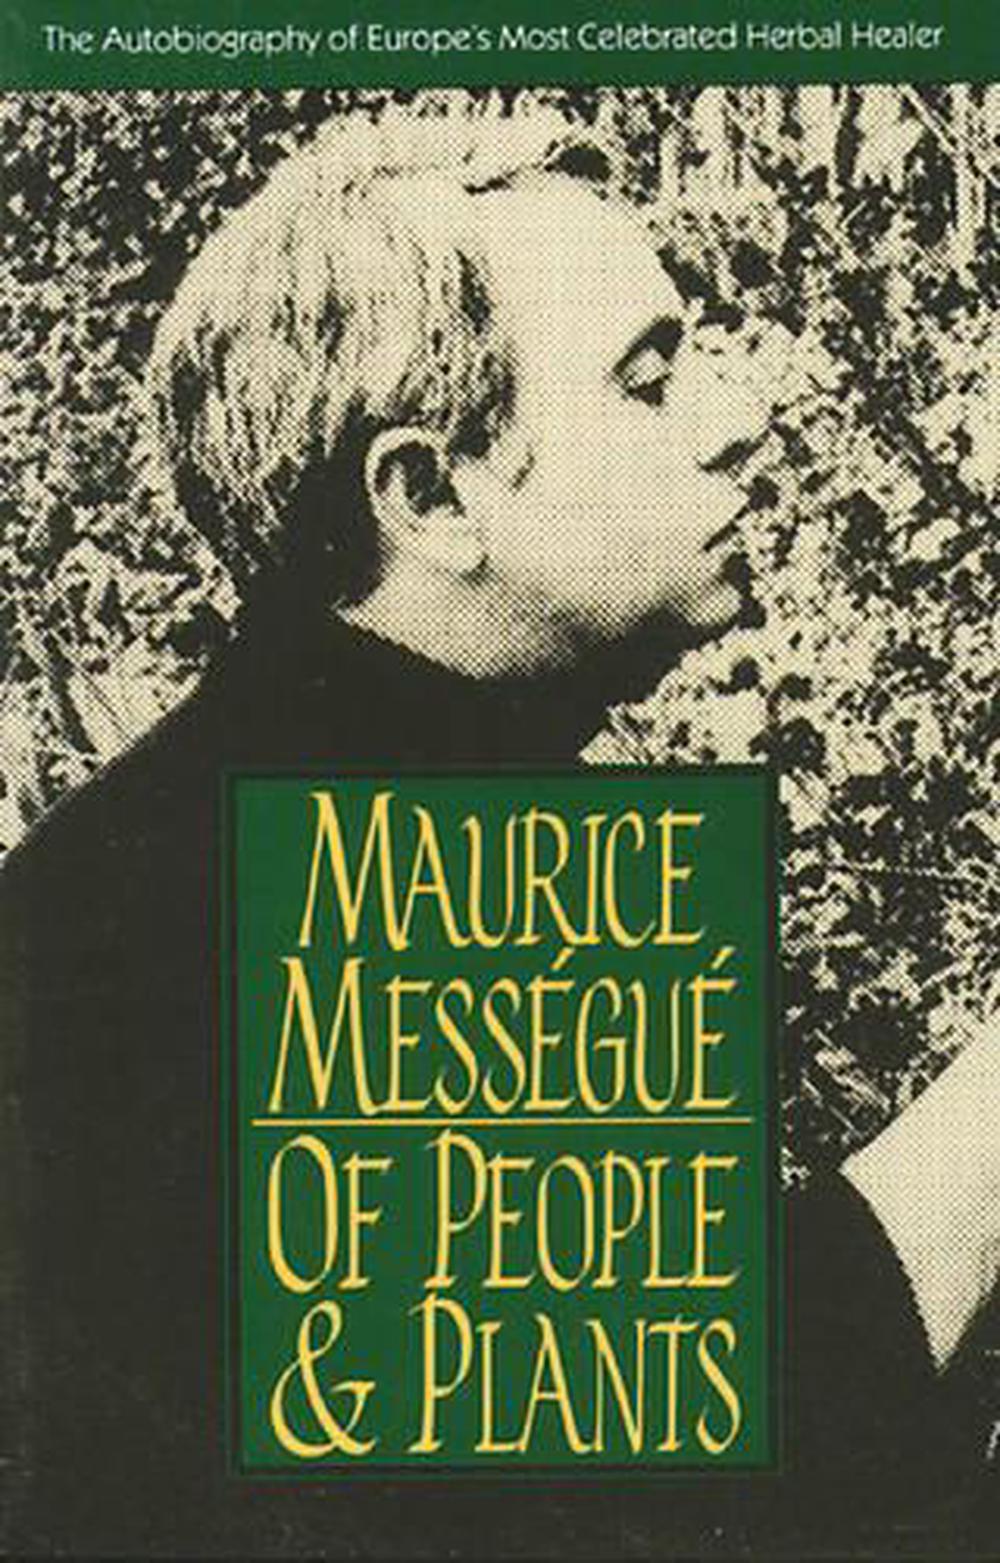 Of People and Plants The Autobiography of Europe's Most Celebrated Healer The 9780892814374 eBay